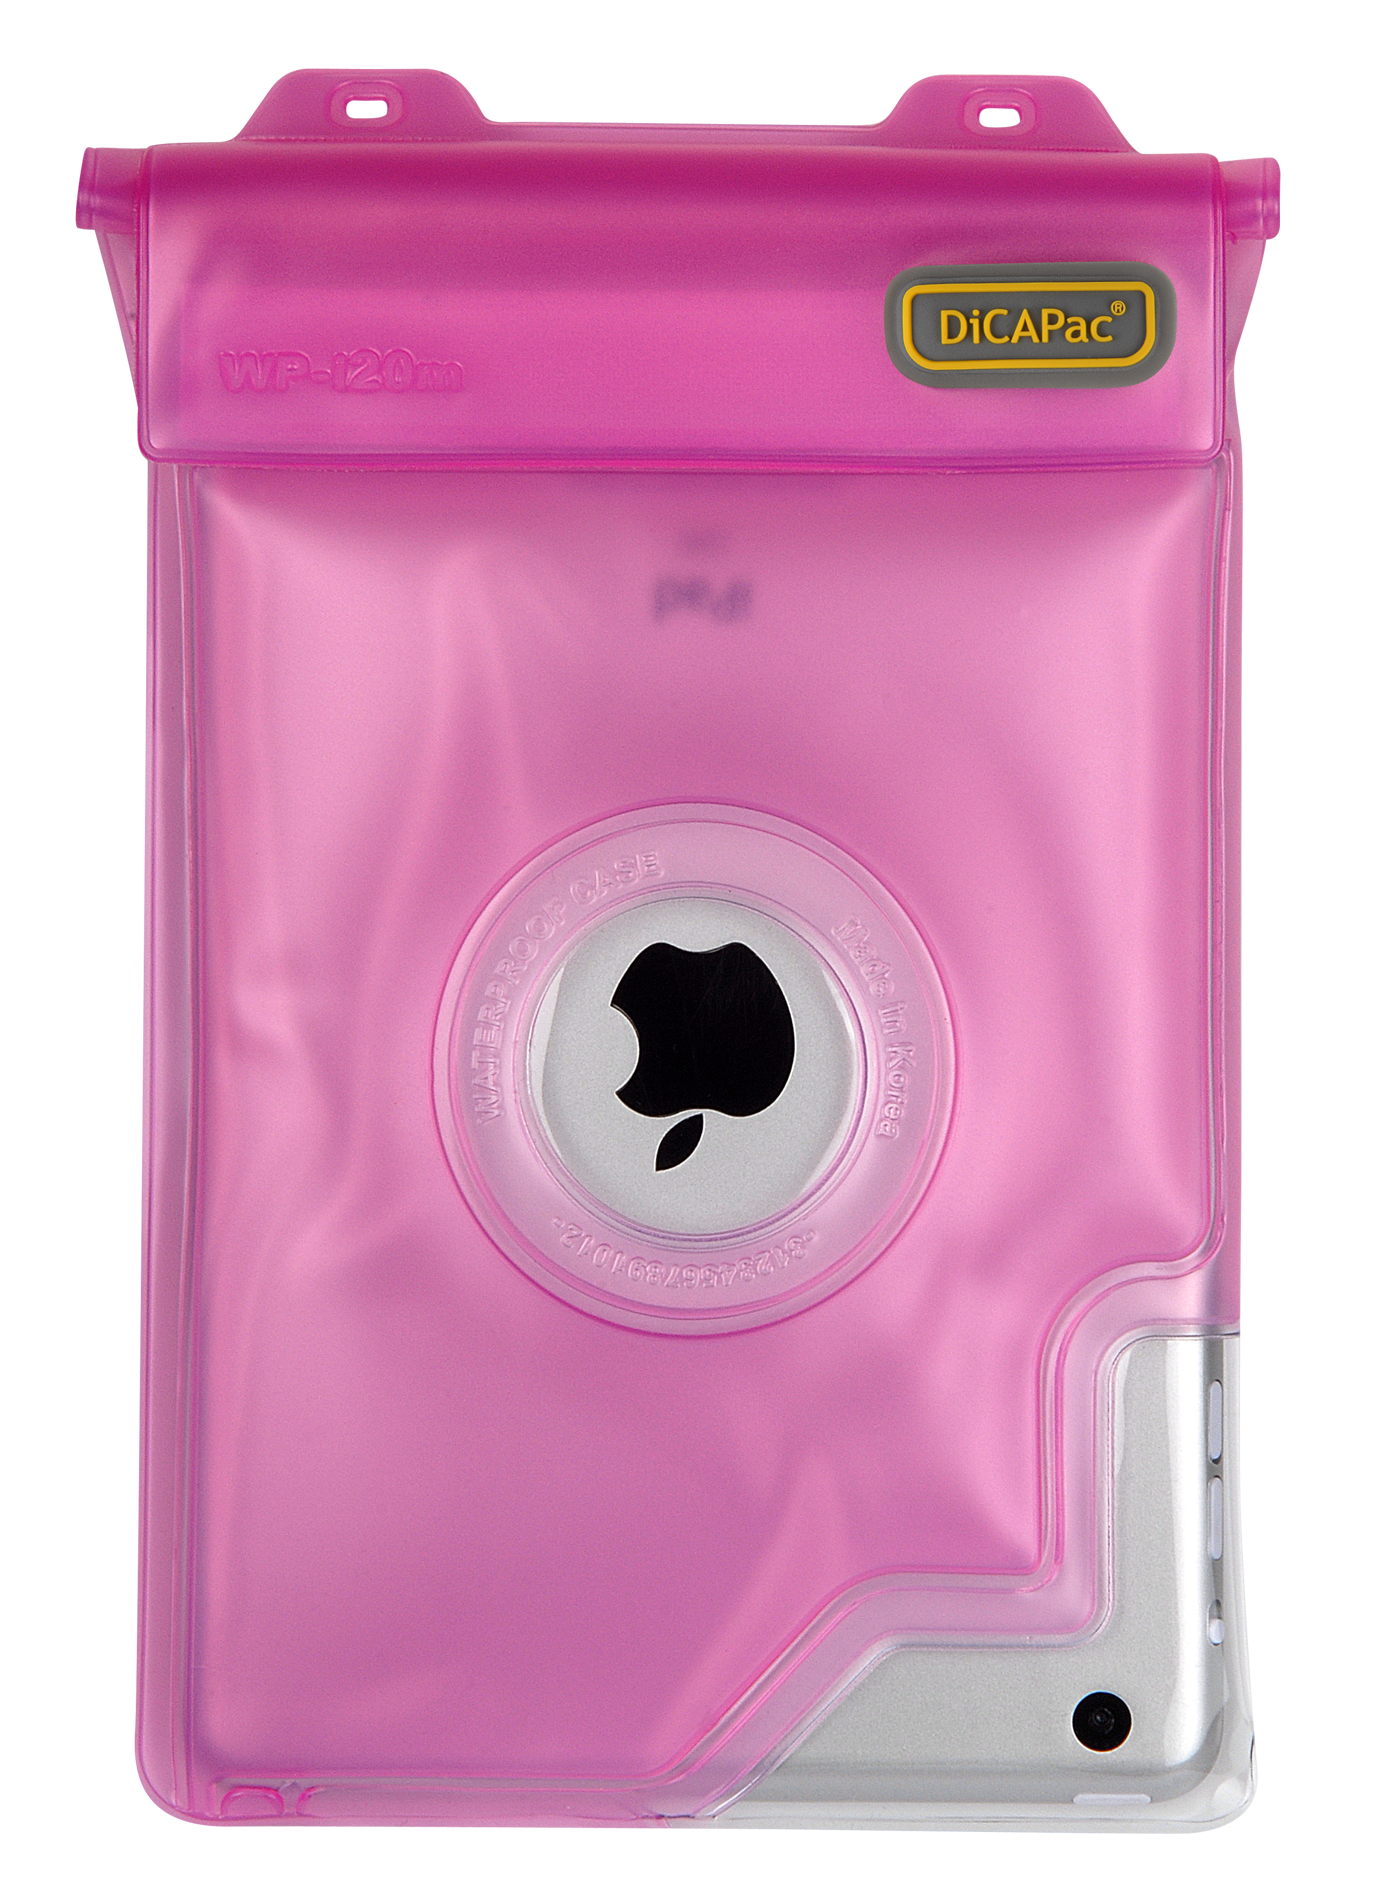 DiCAPac Multipurpose Case, Chest Pouch, Dry Bag waterproof, Pink